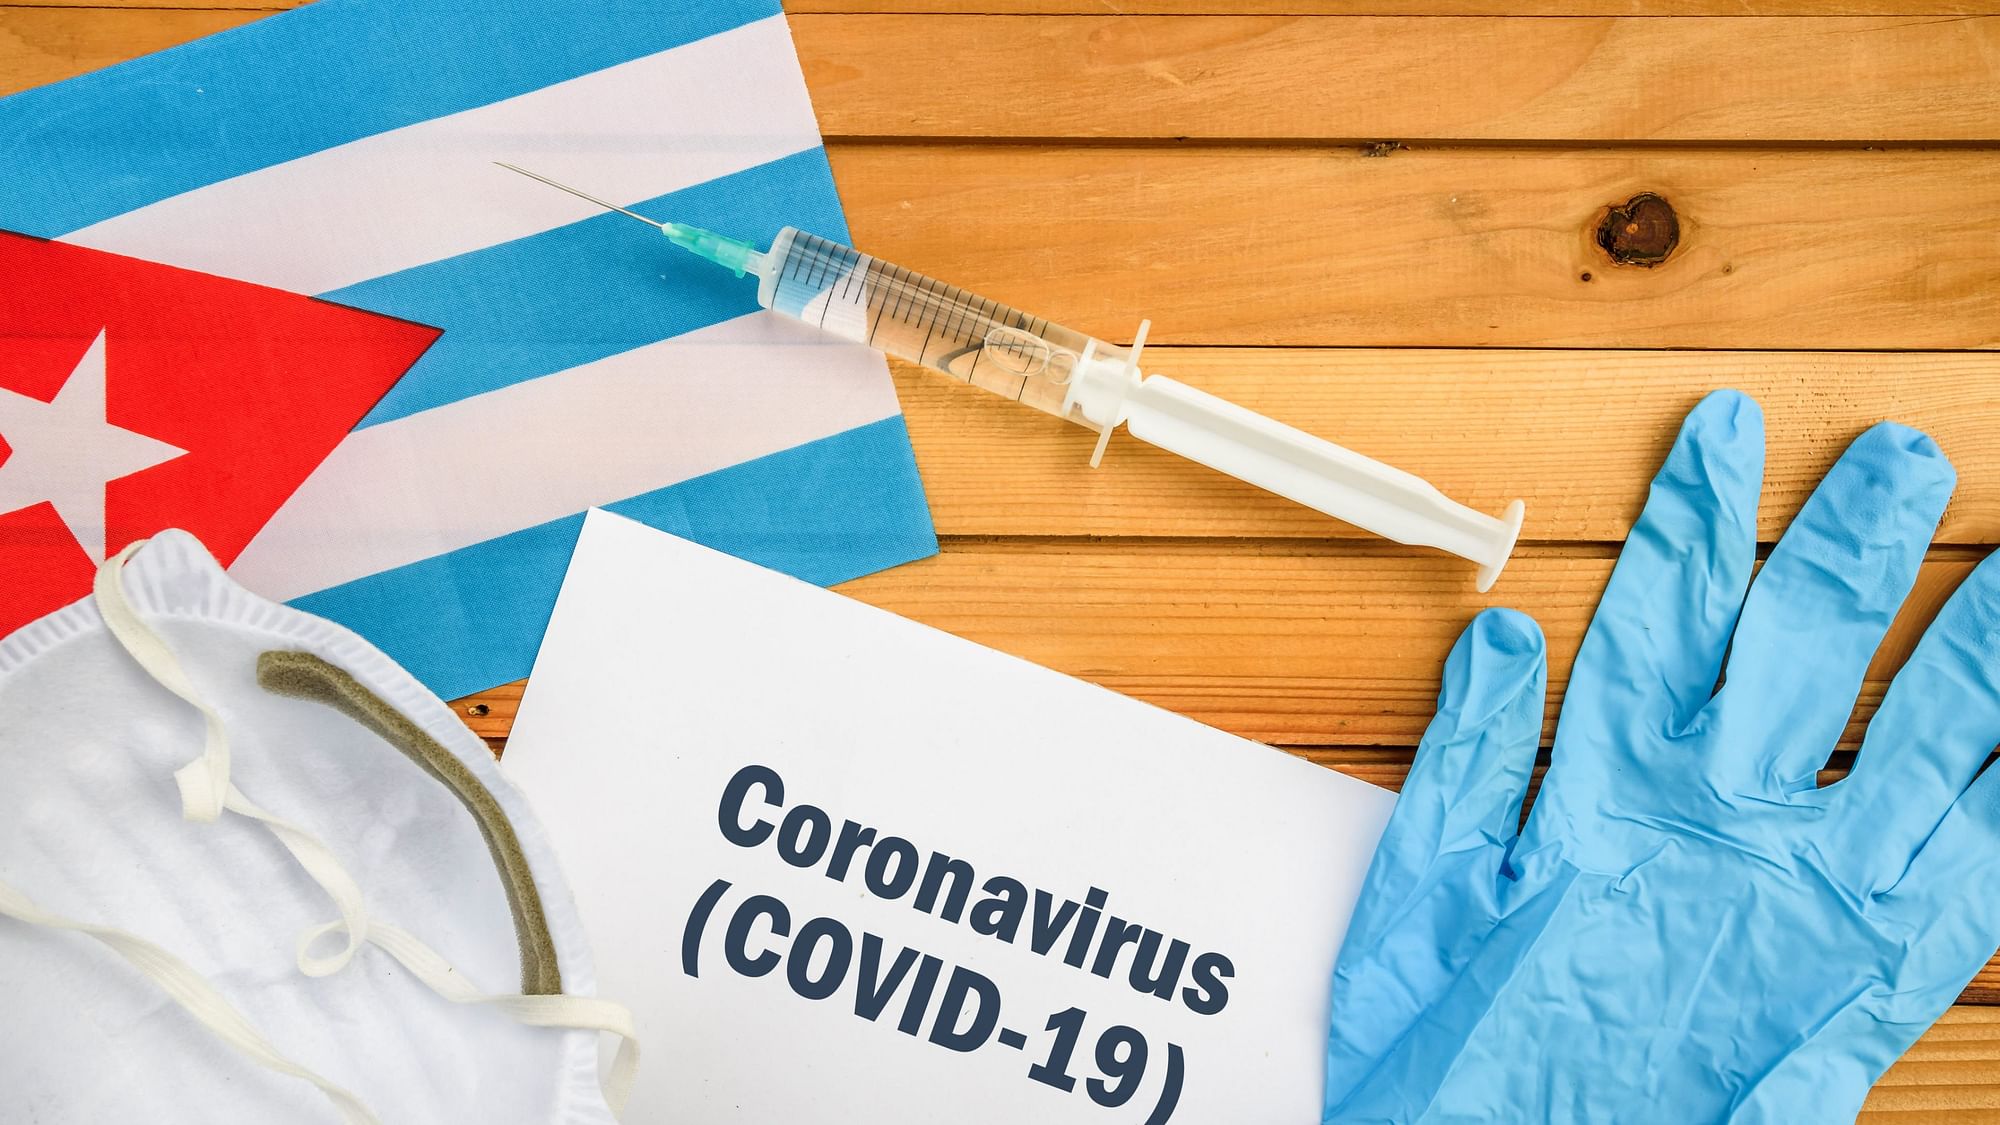 The Oxford coronavirus vaccine could be launched in India in January 2021. Pune-based Serum Institute chief Adar Poonawalla informed NDTV.